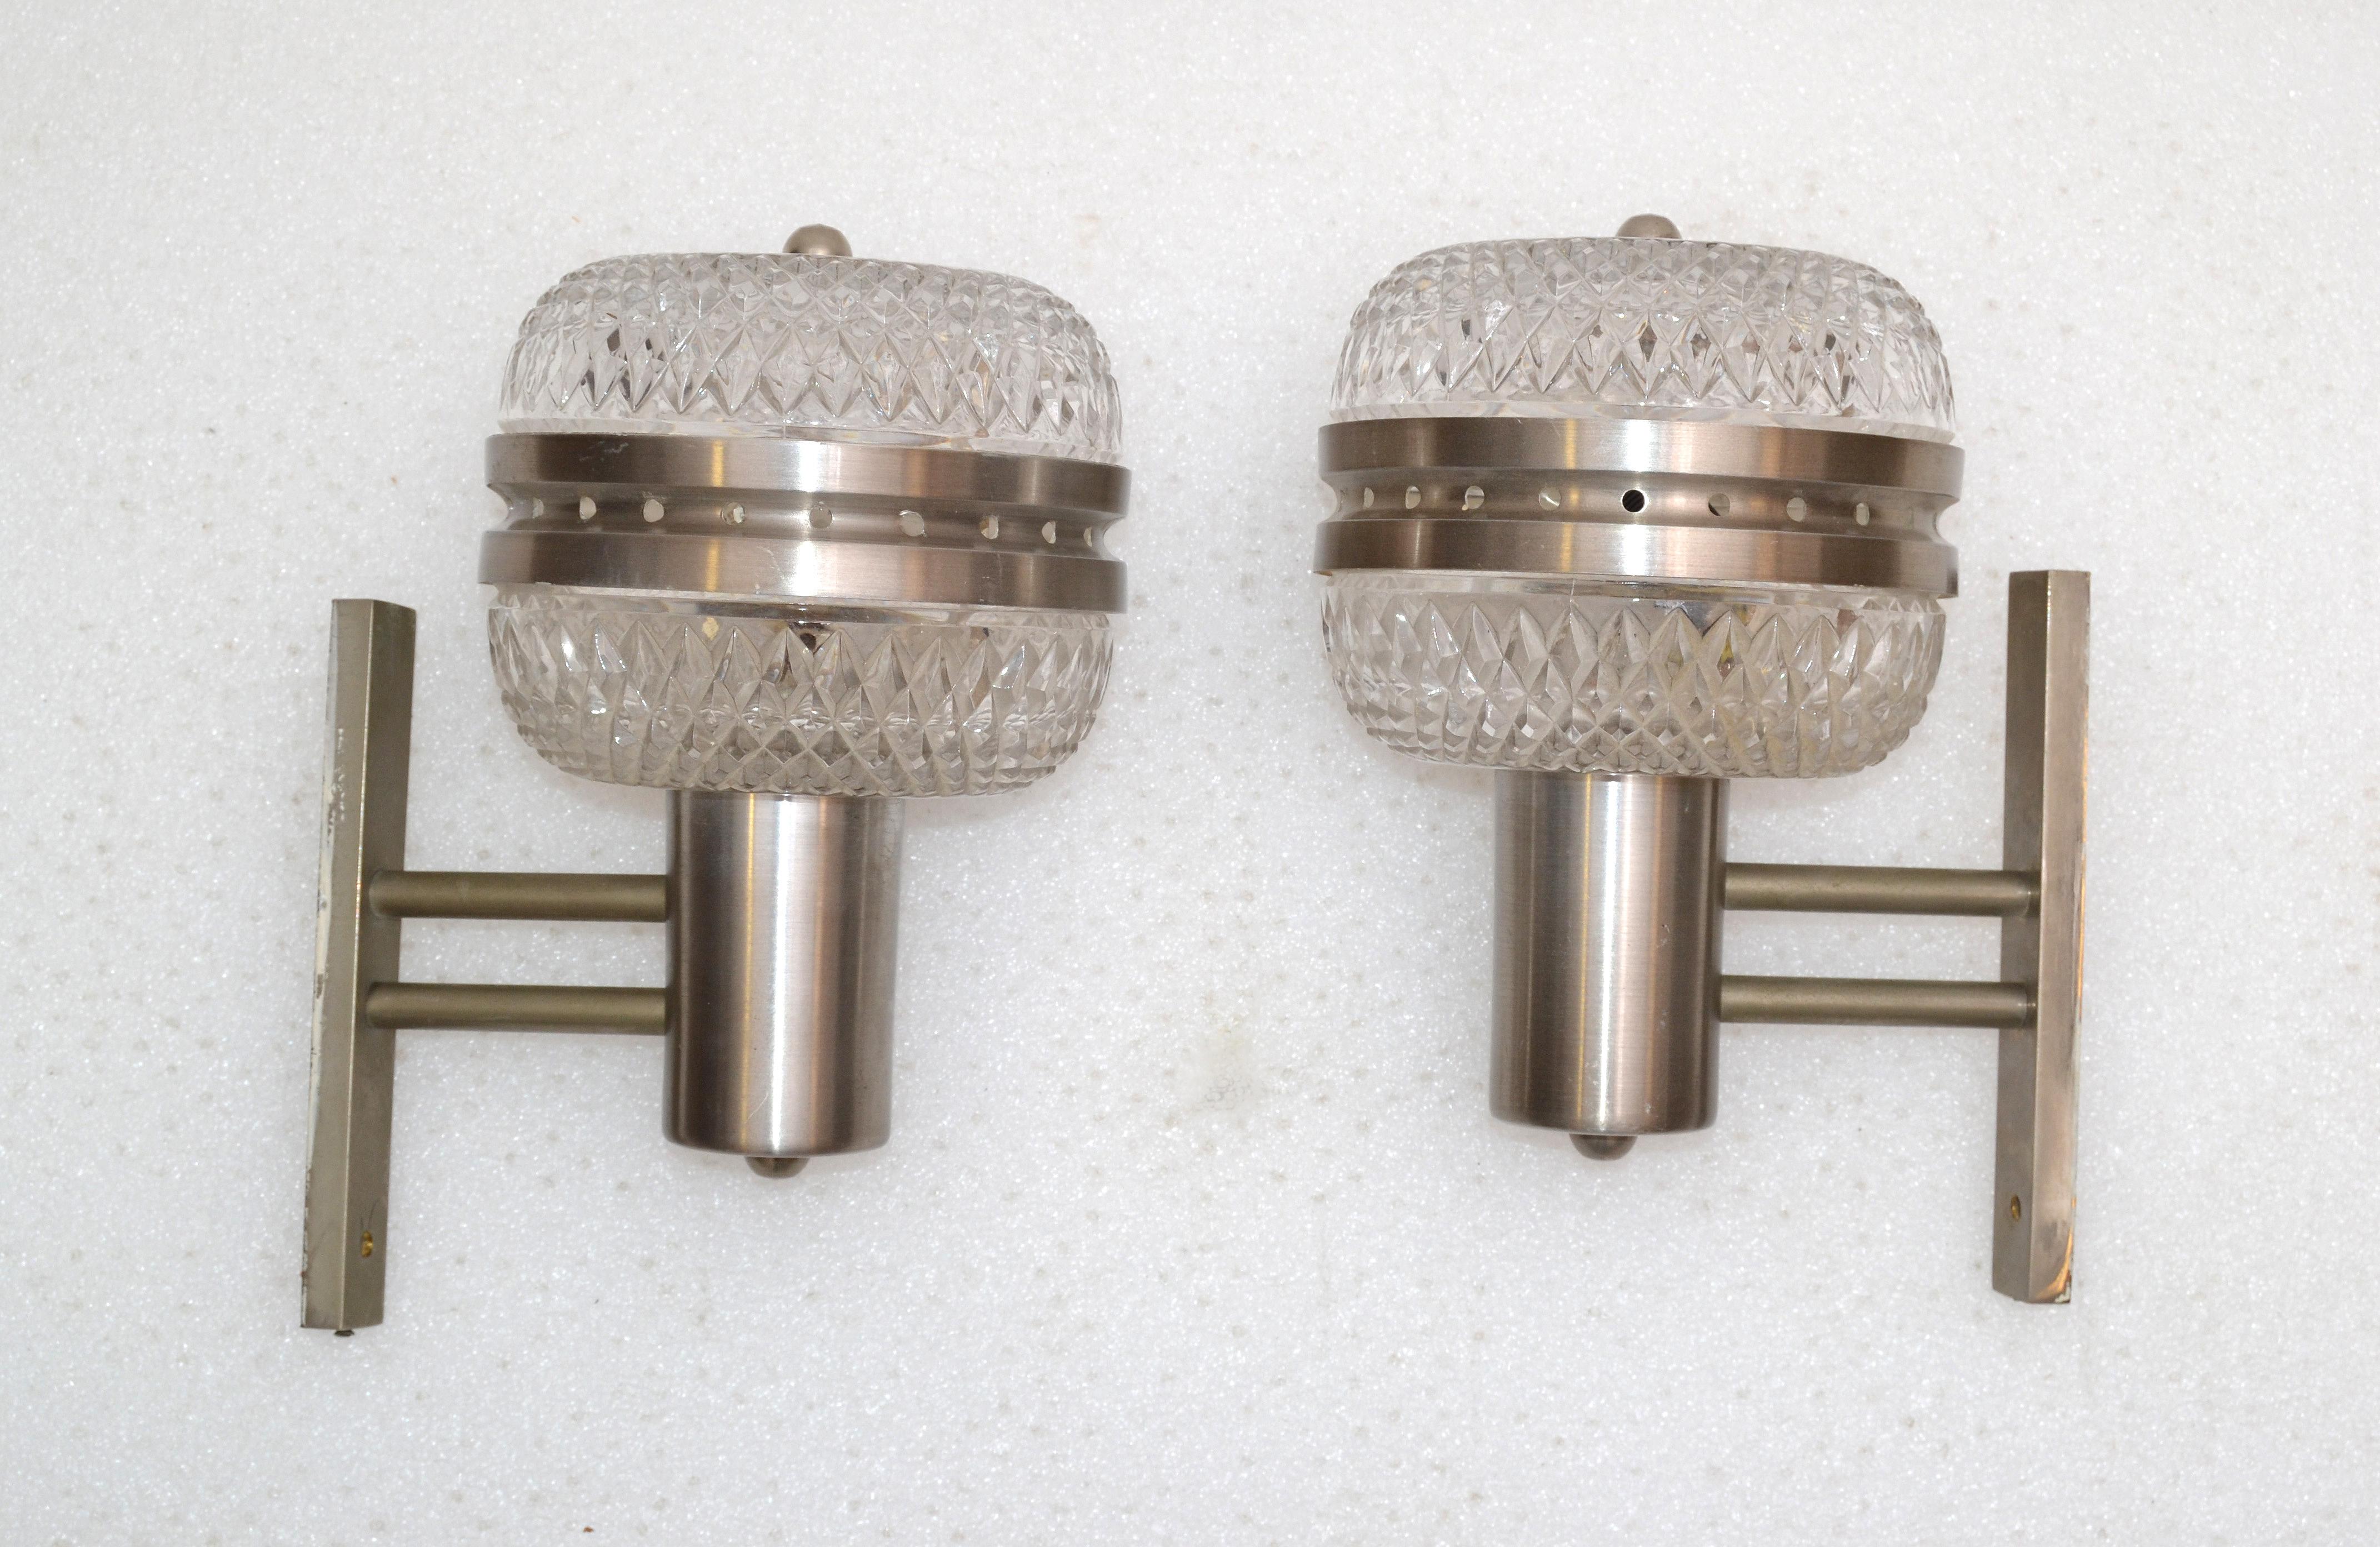 We offer a pair of brushed stainless steel sconces, wall lights with cut glass globes, made in Italy.
In perfect working condition and each takes a small round E14 light bulb.
Back plate measures: 7.25 x 1 x 0.5 inches height.
Projection from the